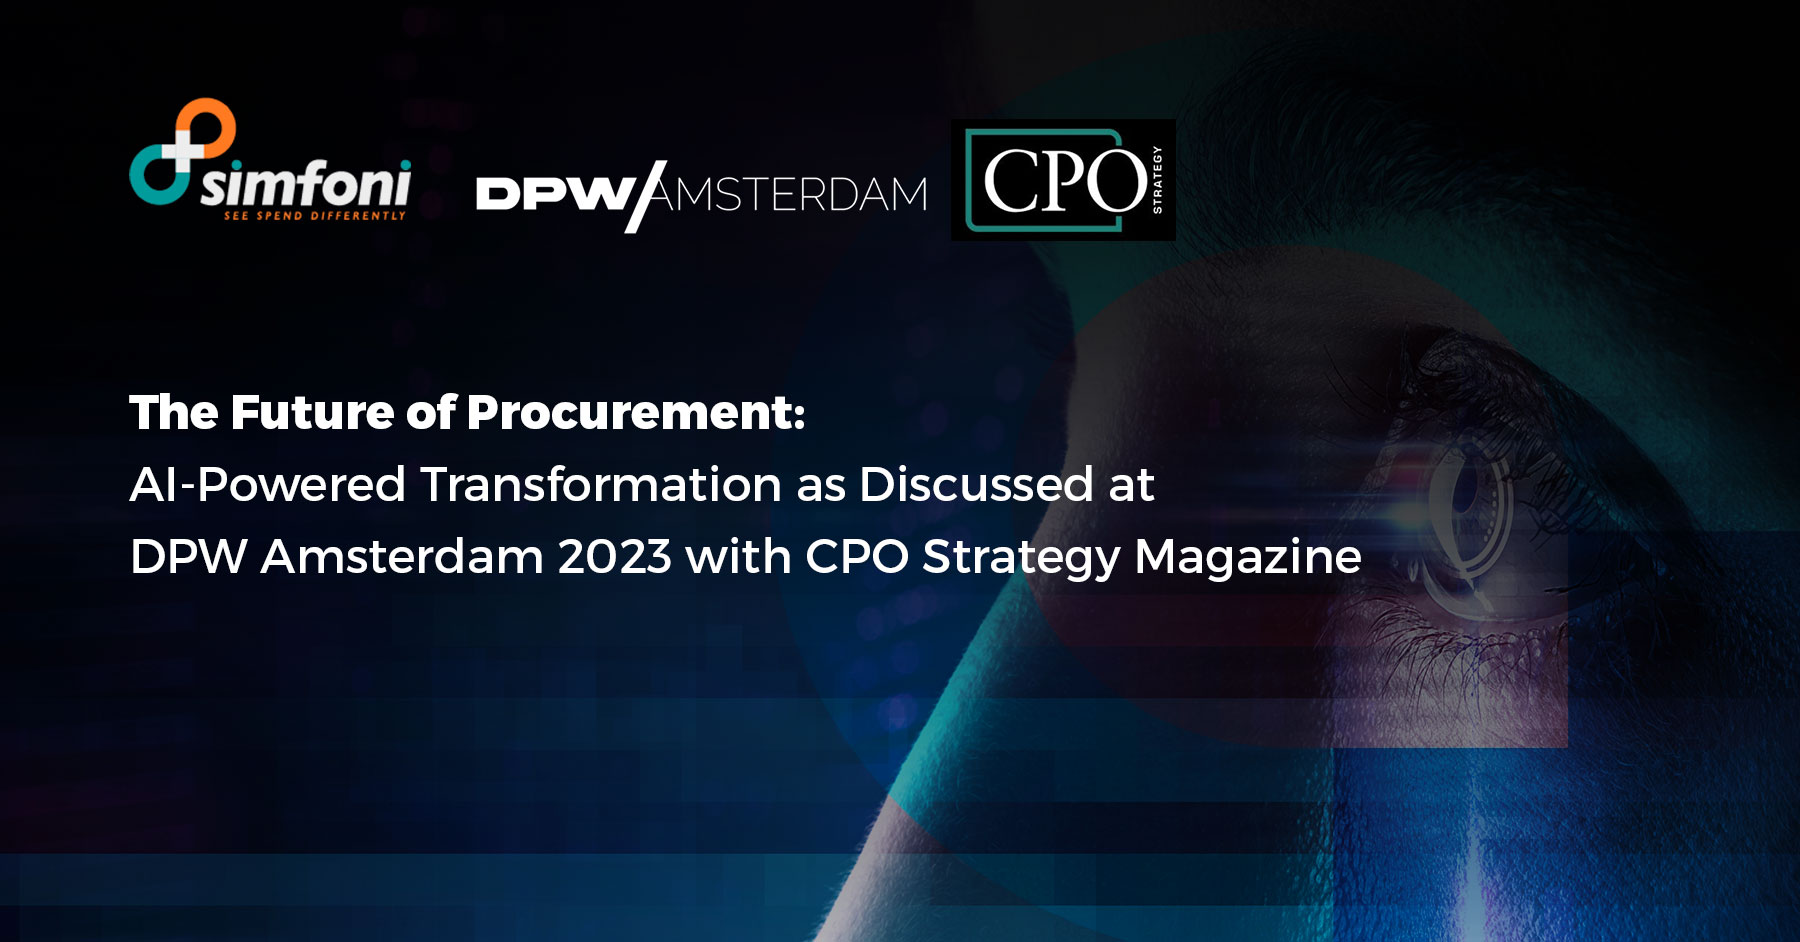 The Future of Procurement: AI-Powered Transformation as Discussed at DPW Amsterdam 2023 with CPO Strategy Magazine